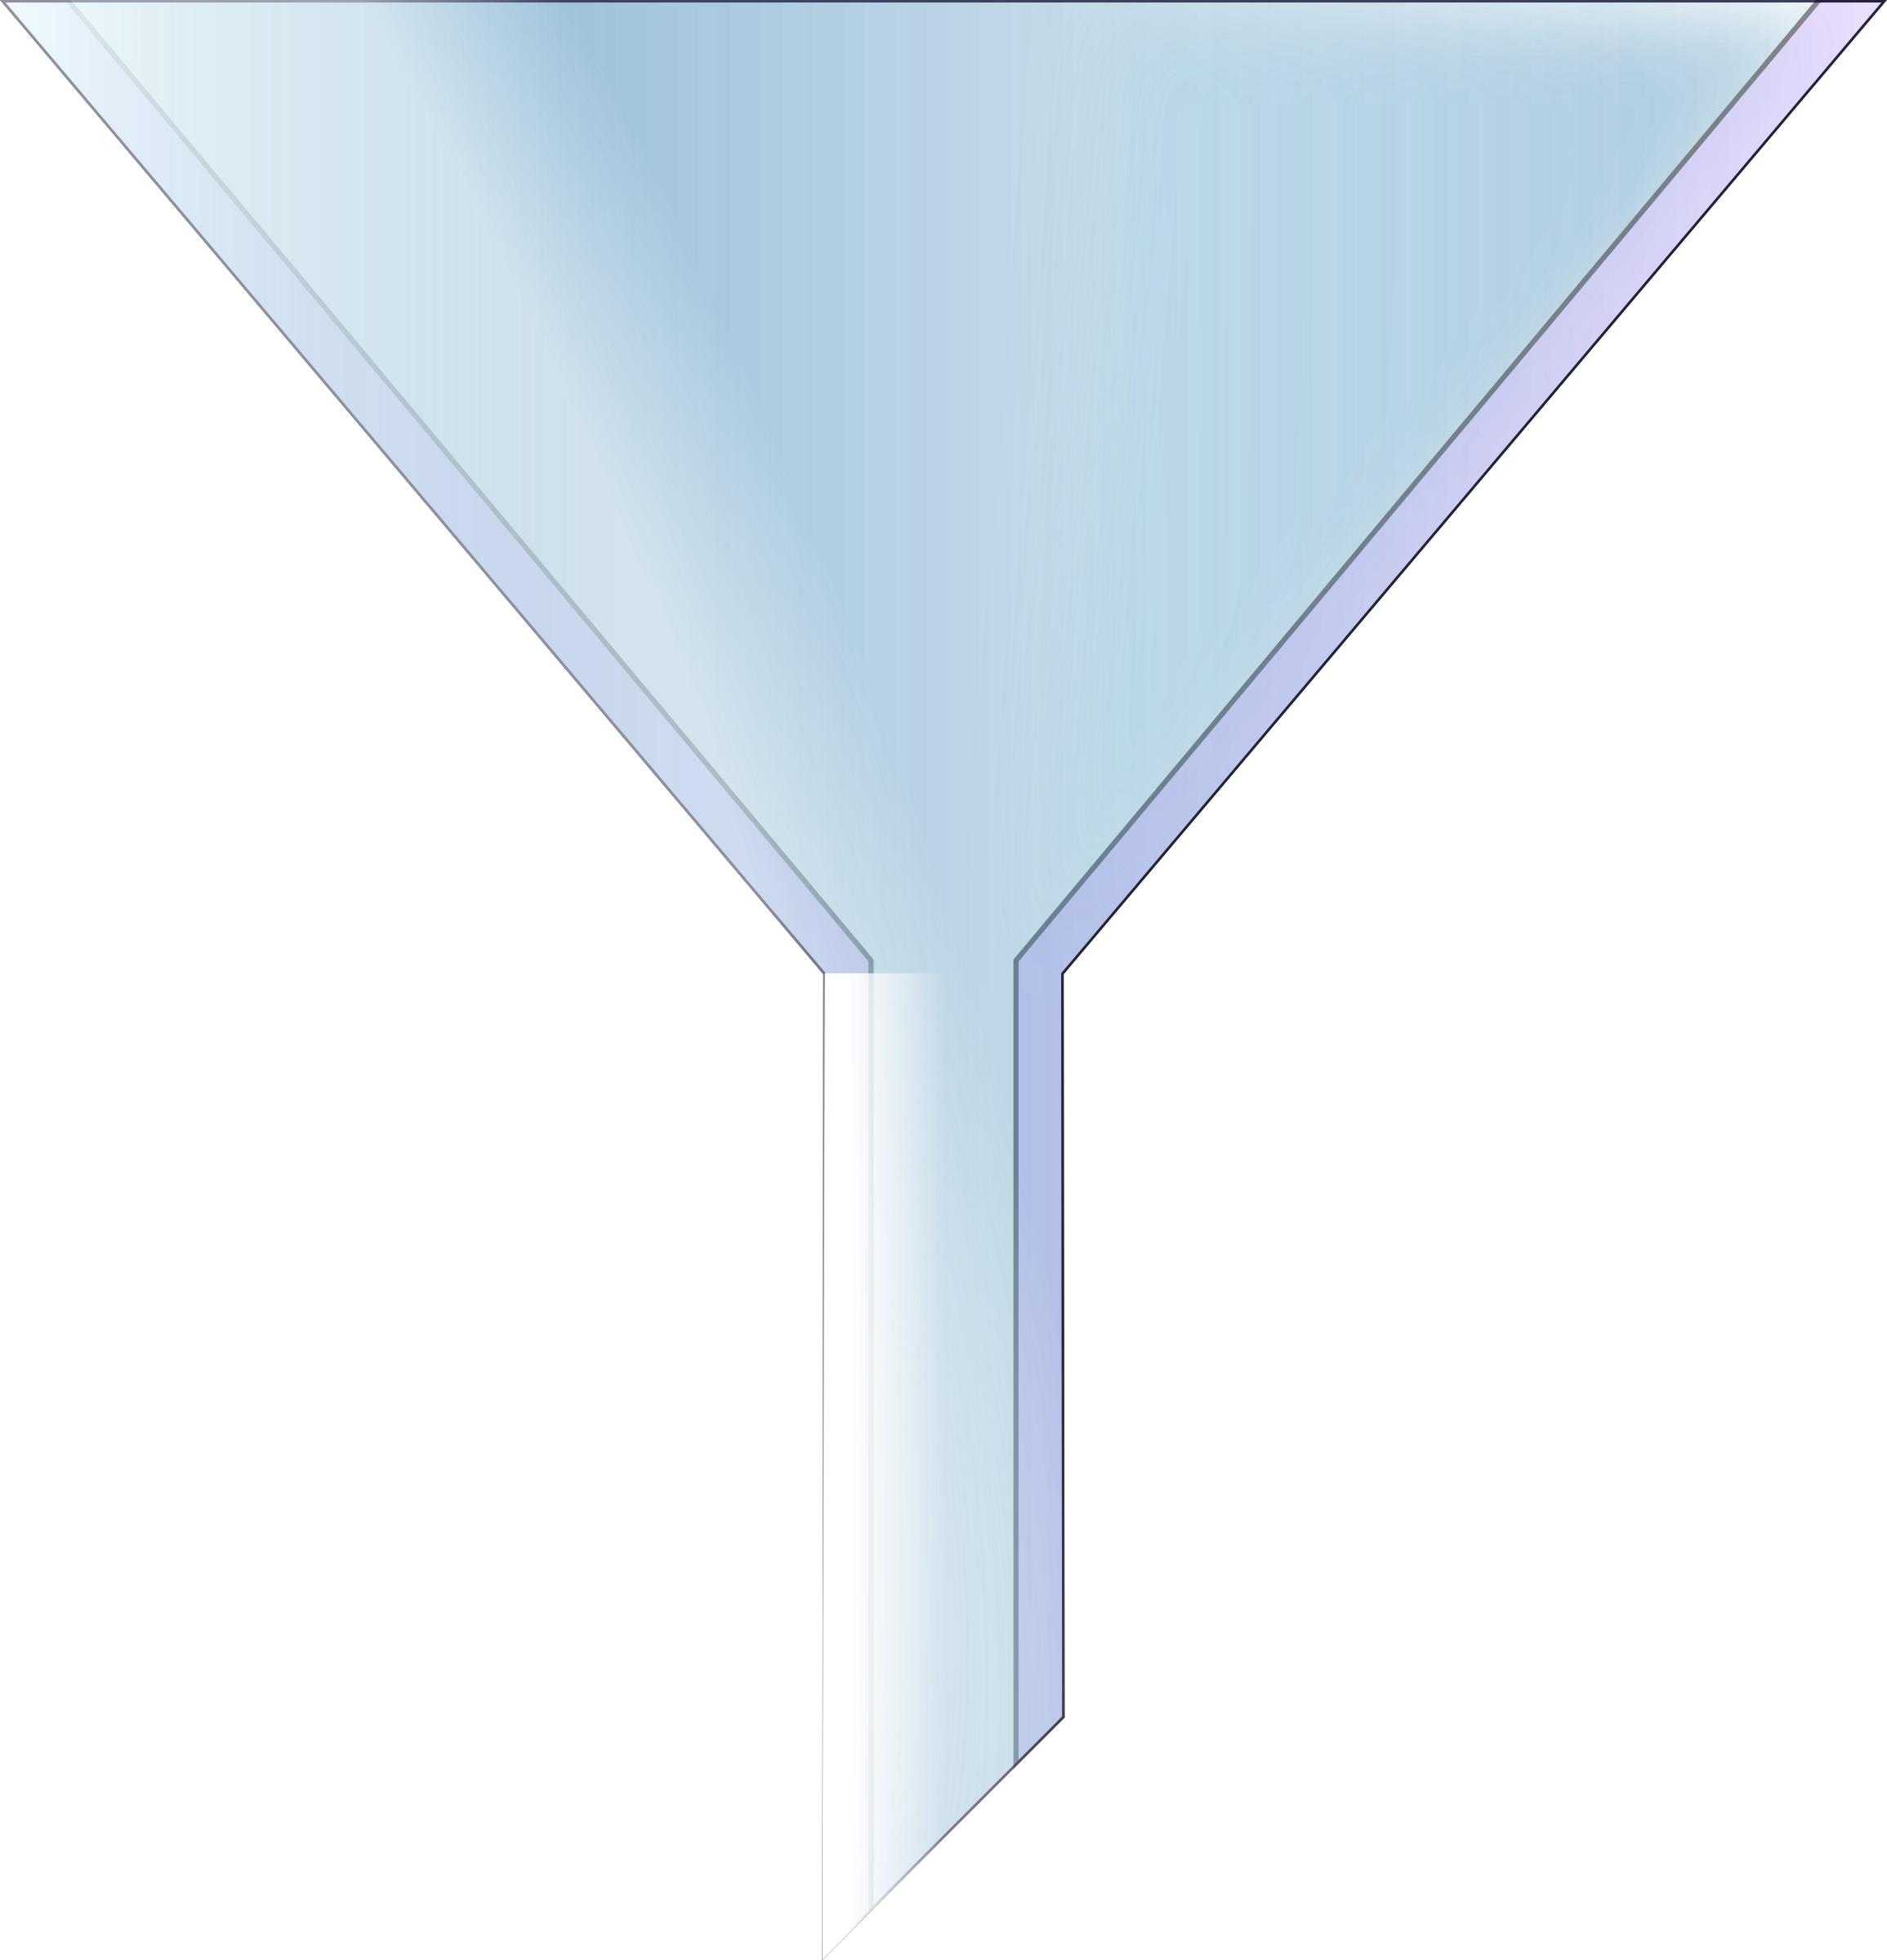 Laboratory conical funnel png